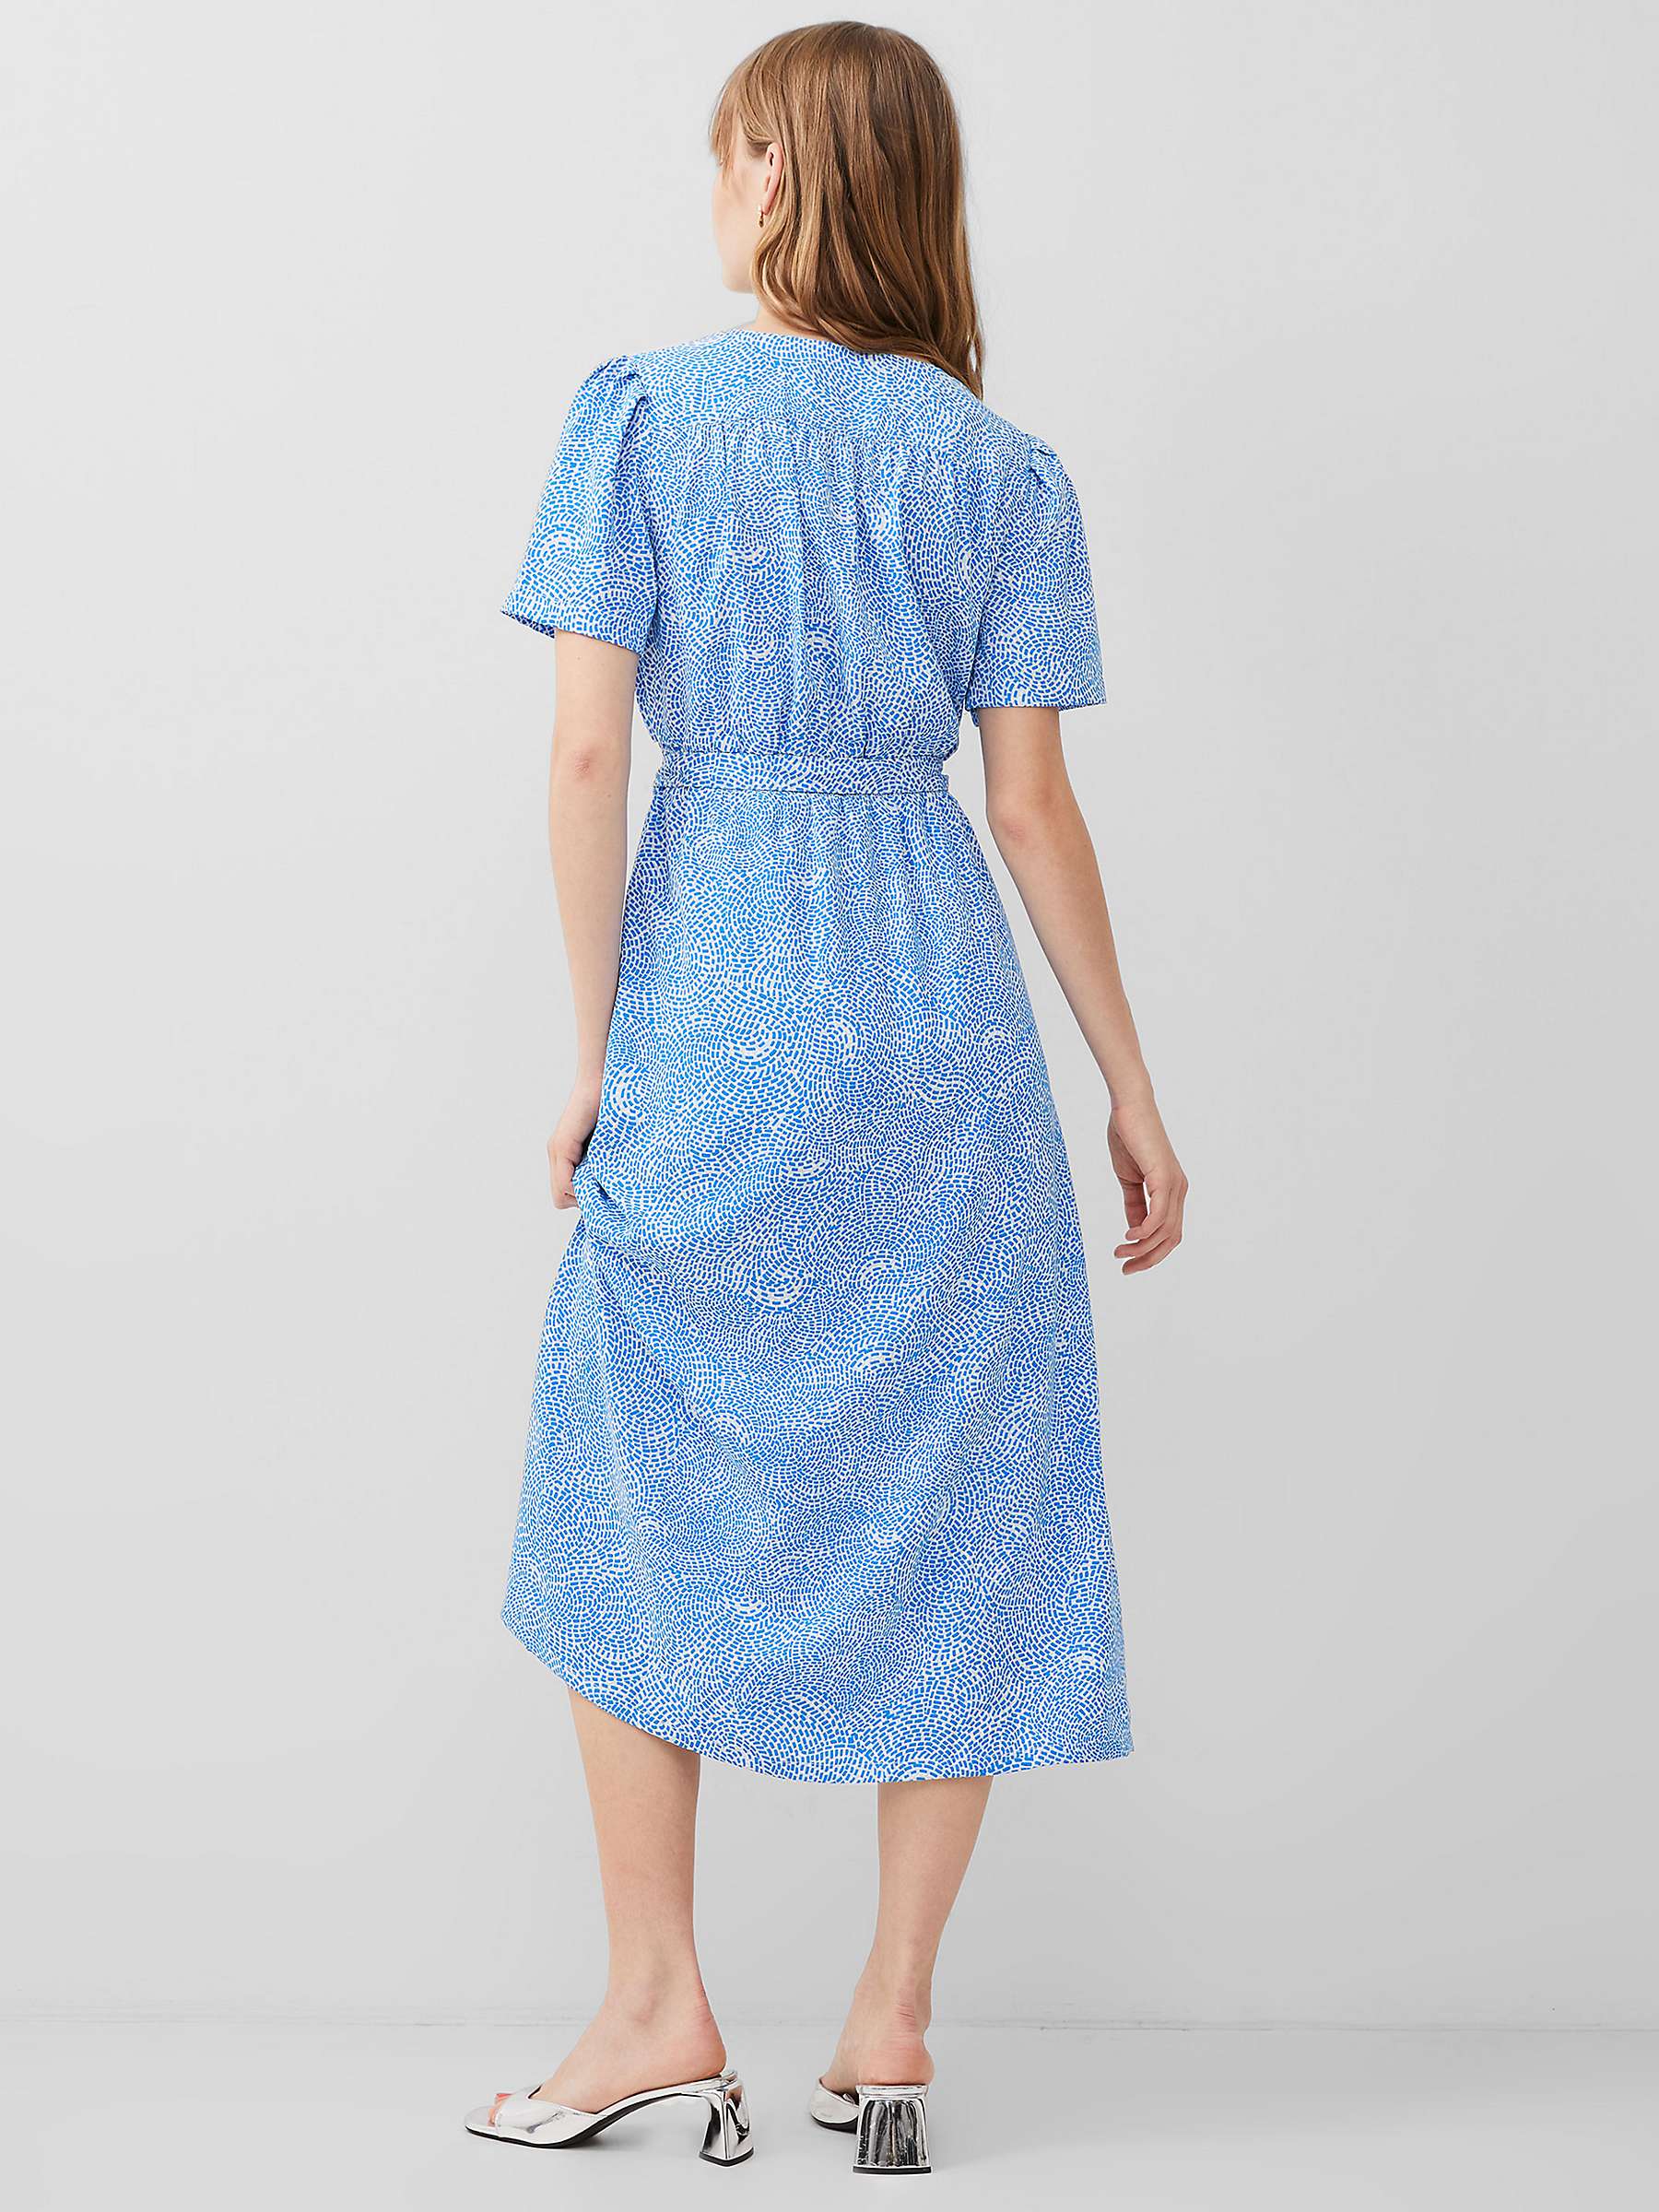 Buy French Connection Bernice Elitan Abstract Print Midi Dress, Blue Mist Online at johnlewis.com